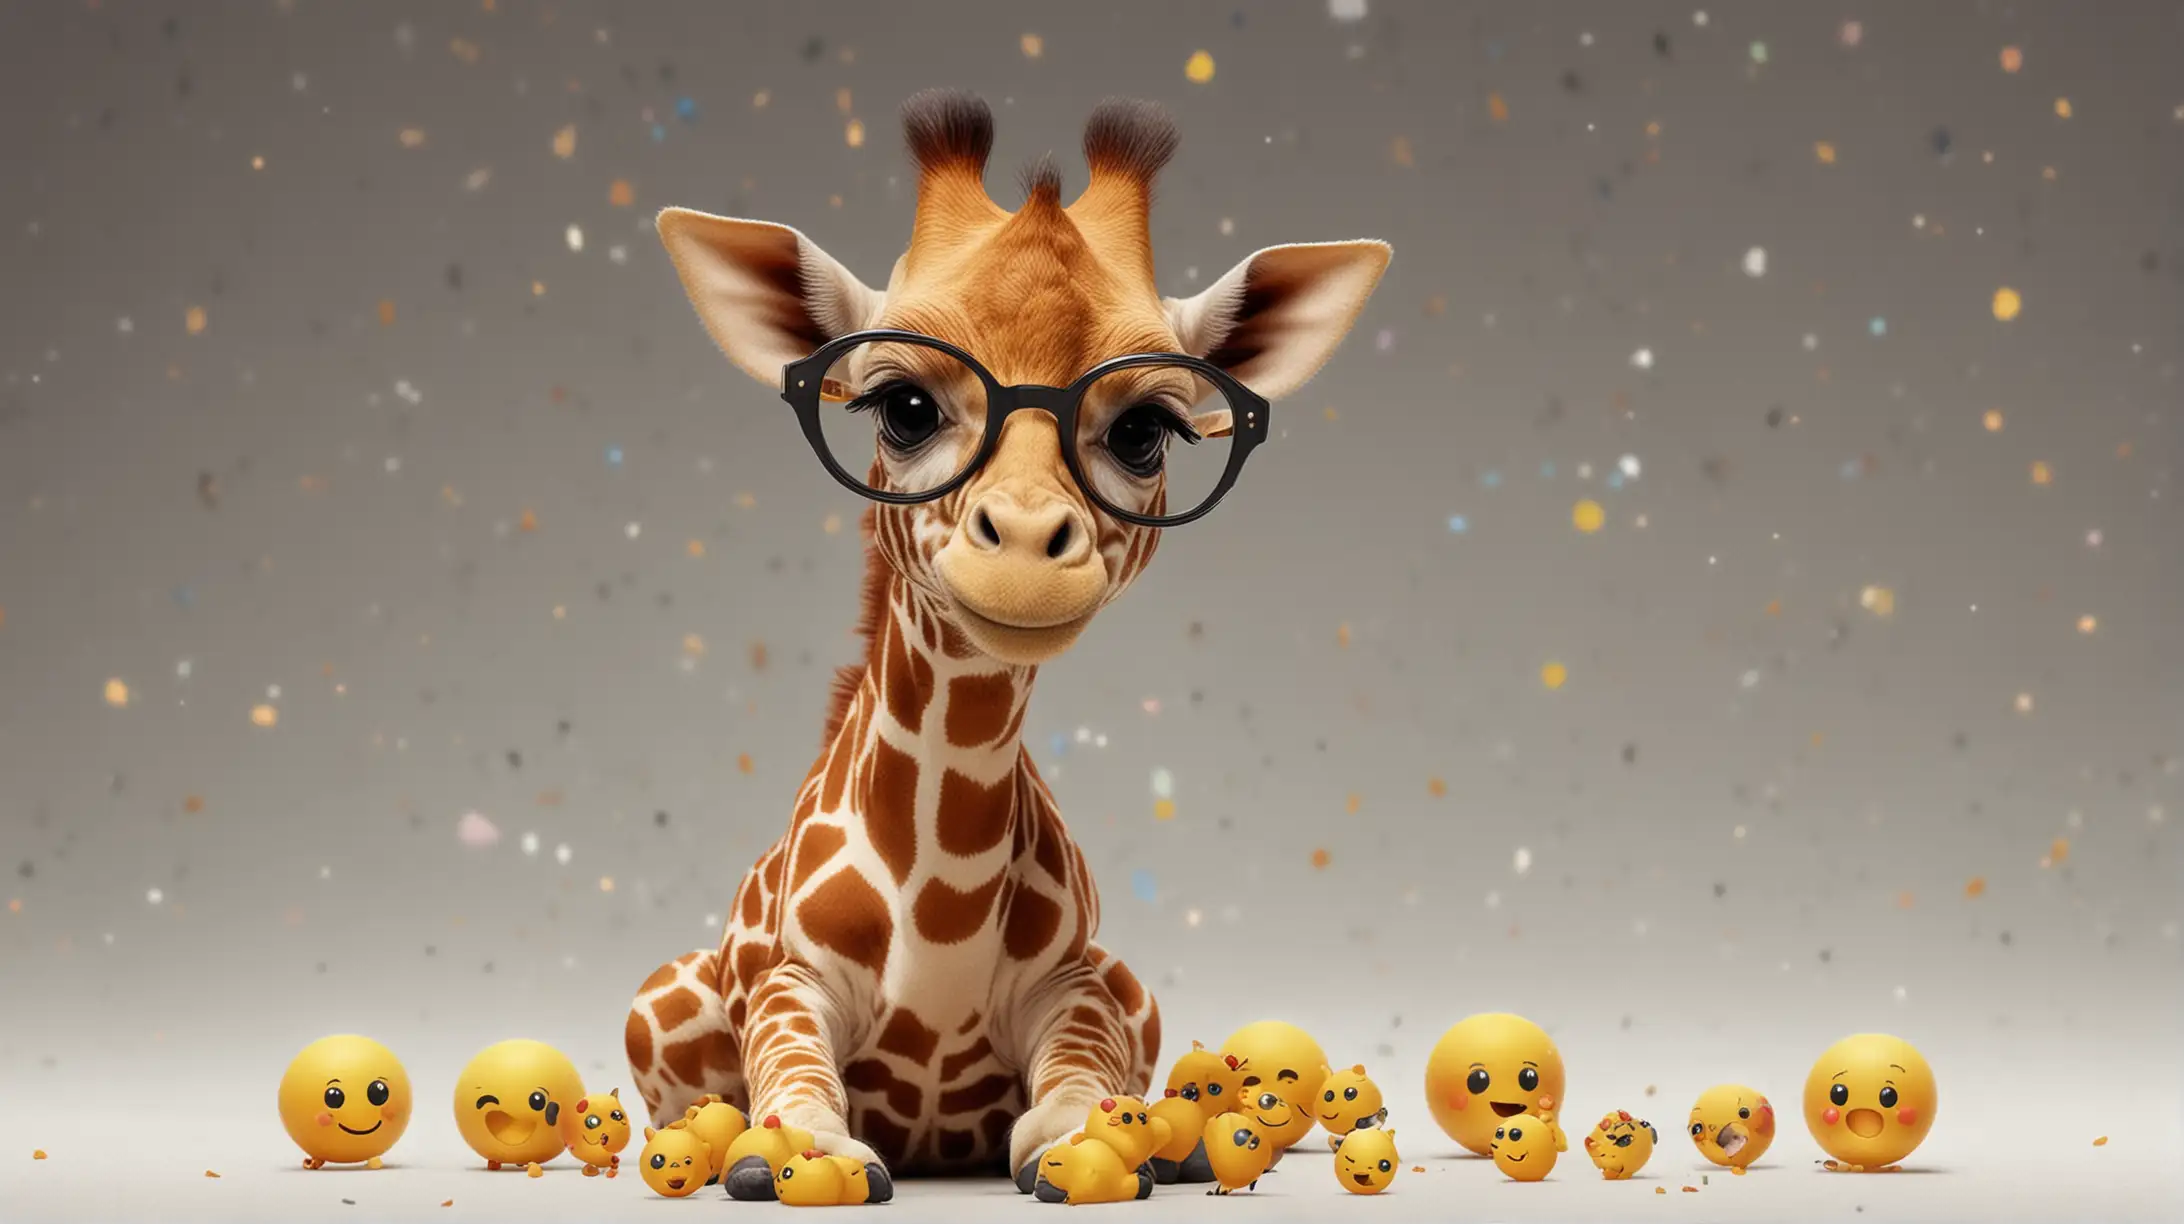 very small babby Giraffe with glasses in the space  with many emojis